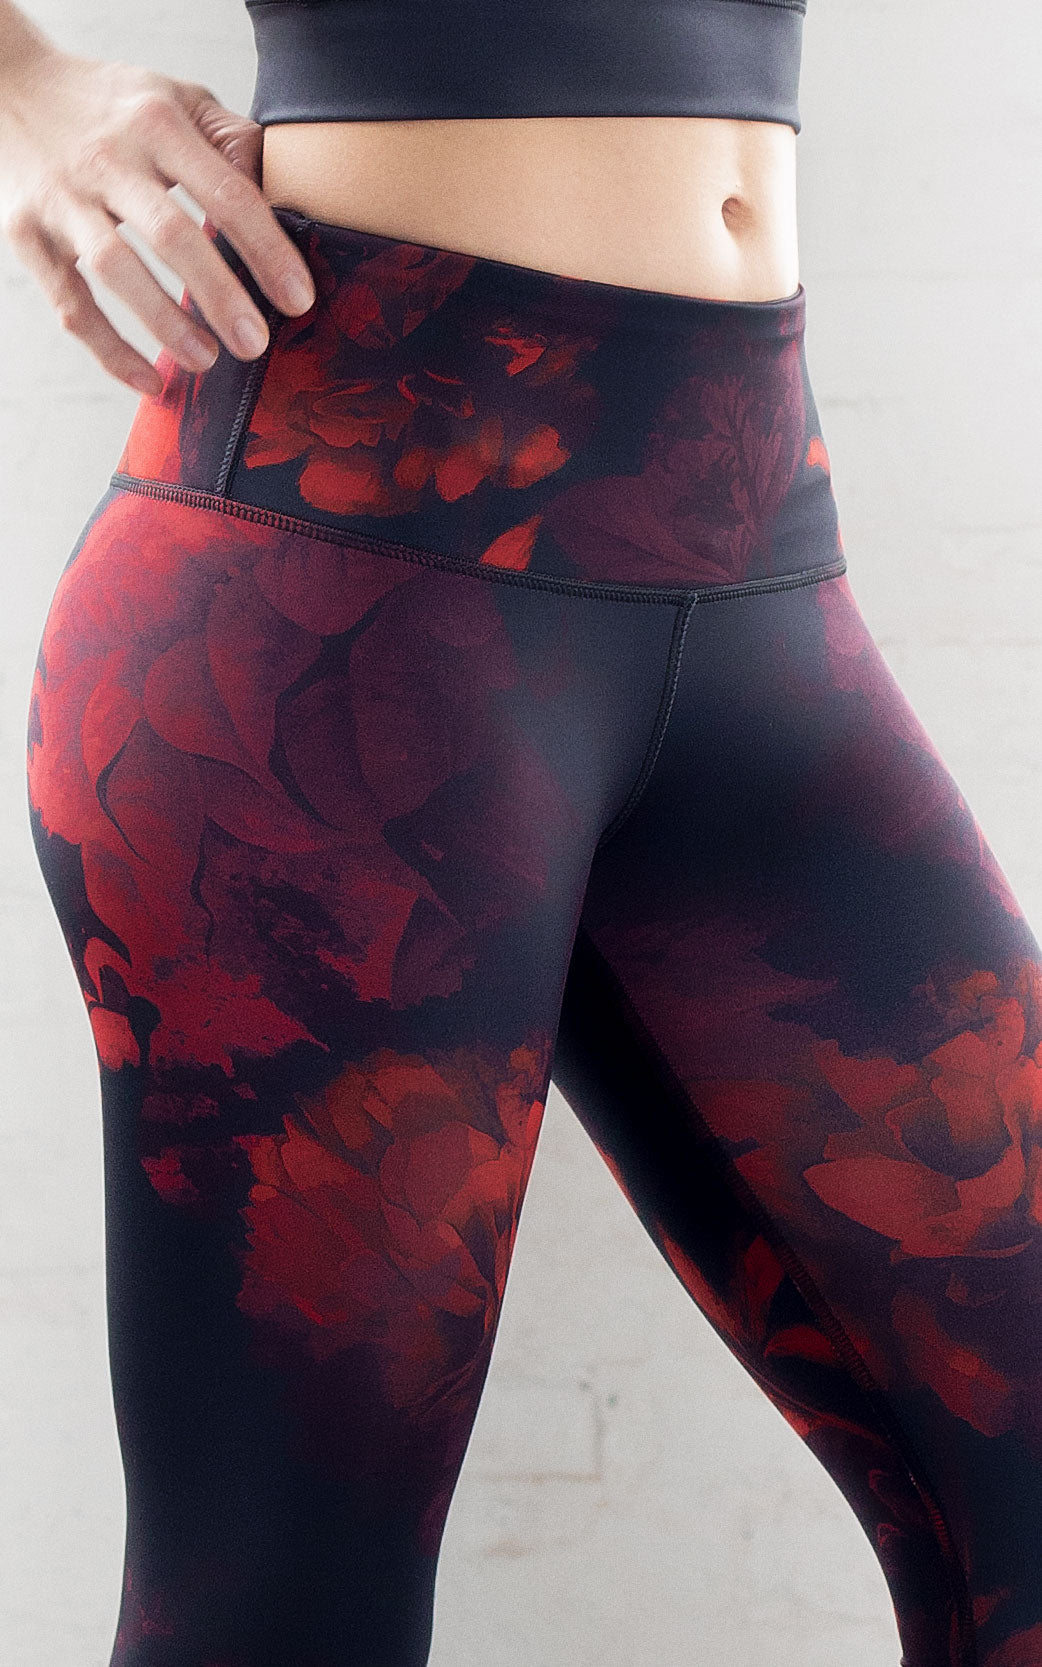 Women's Full length legging in an elegant dark red floral pattern. High Rise, High Band fit with 26" Inseam. Fabric is luxury blend and all black inside